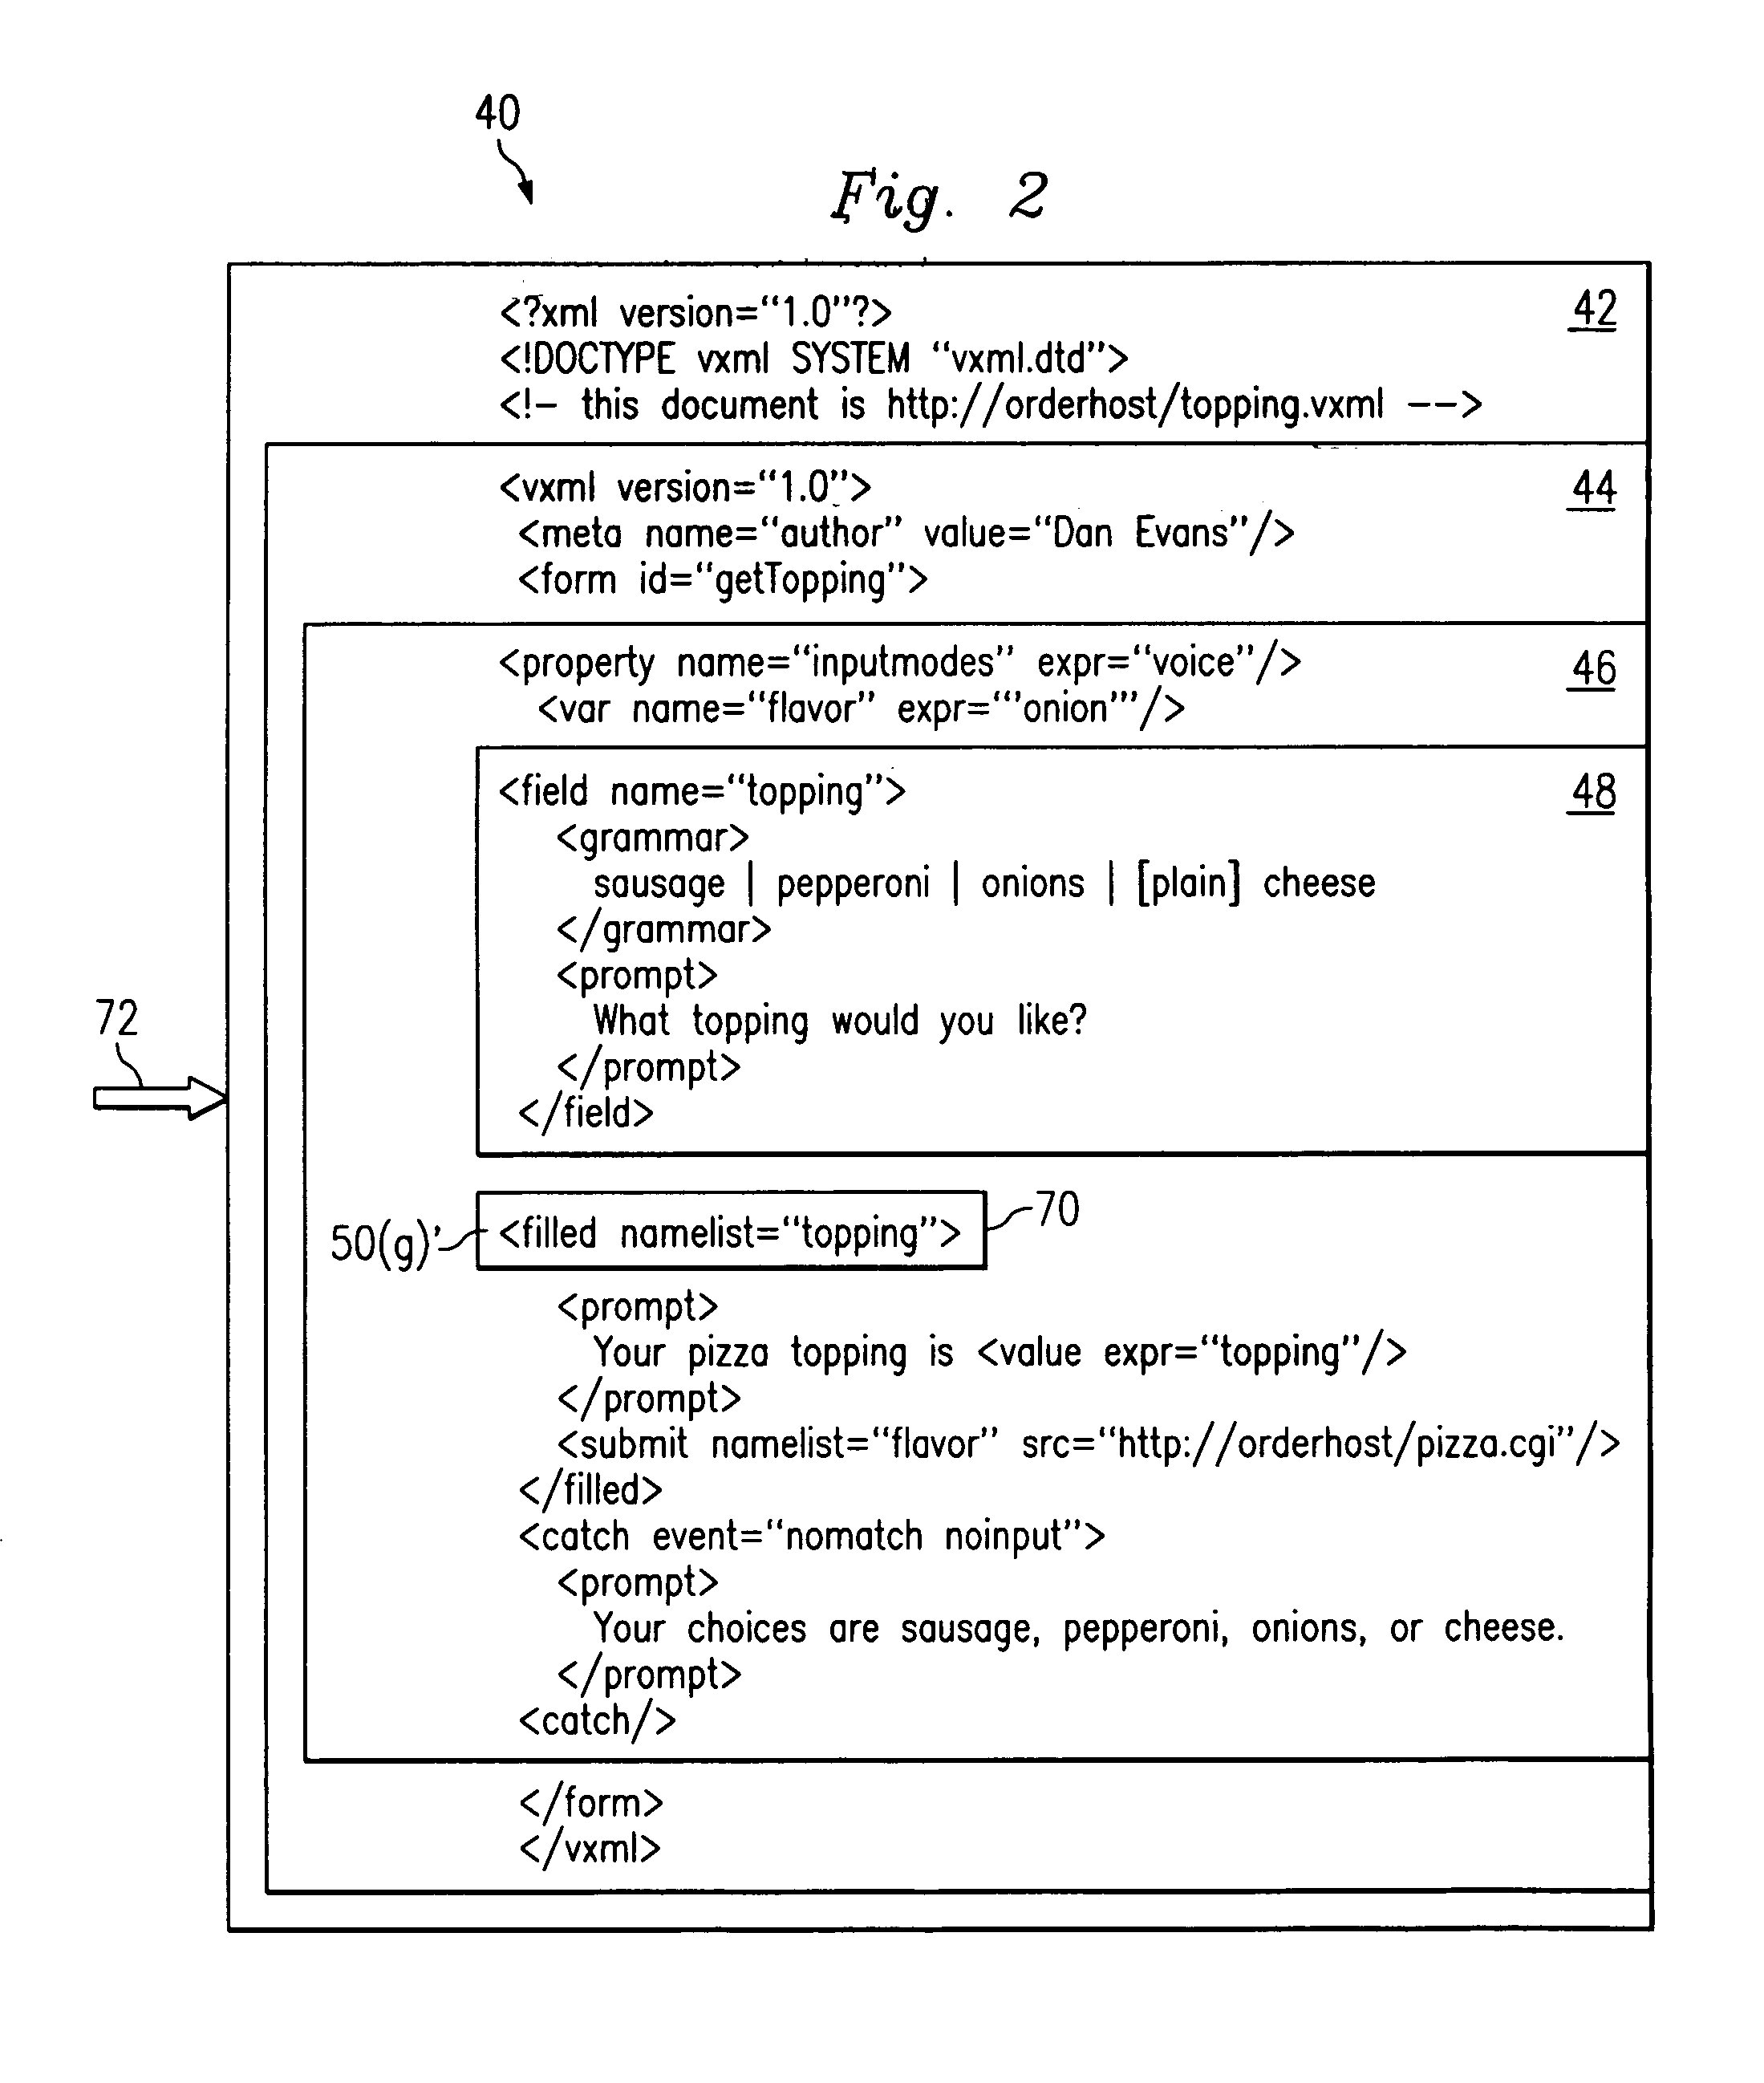 System and method for tracking VoiceXML document execution in real-time